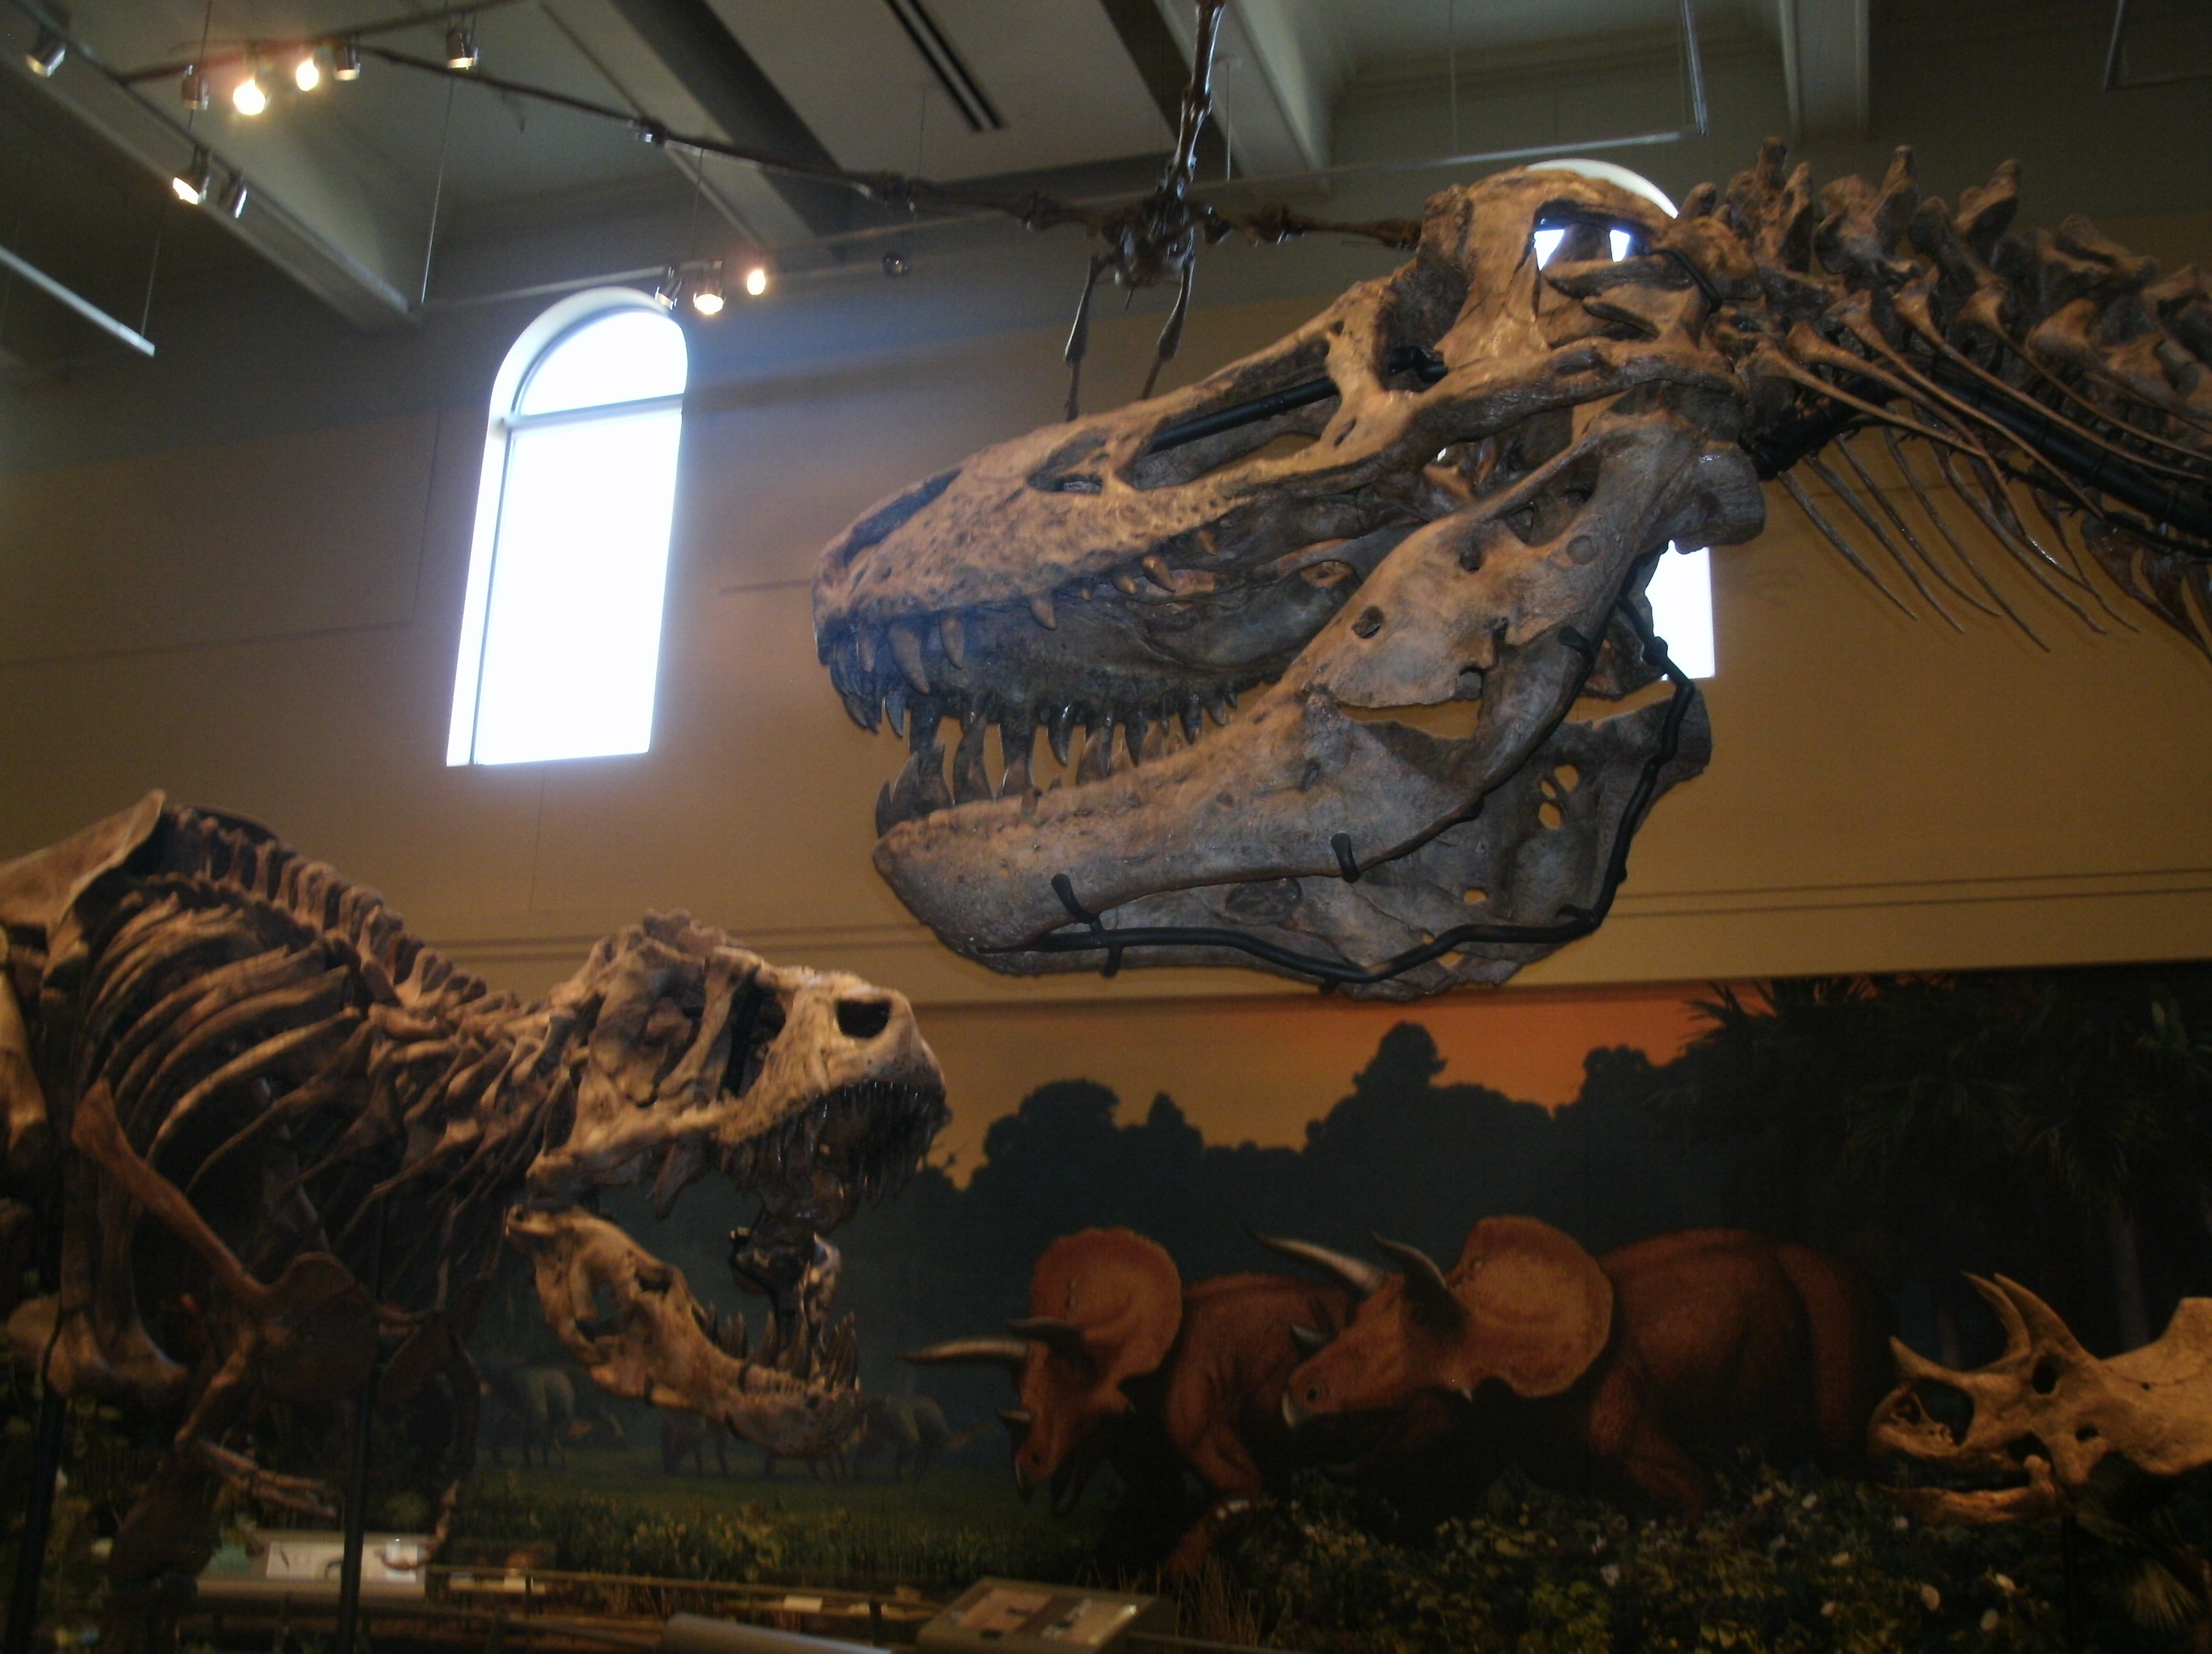 The Carnegie Museum not only has T. rex skeletons; it has THE T. rex skeleton, the holotype, the skeleton example from which Tyrannosaurus rex ("tyrant lizard king") was named back in 1905.